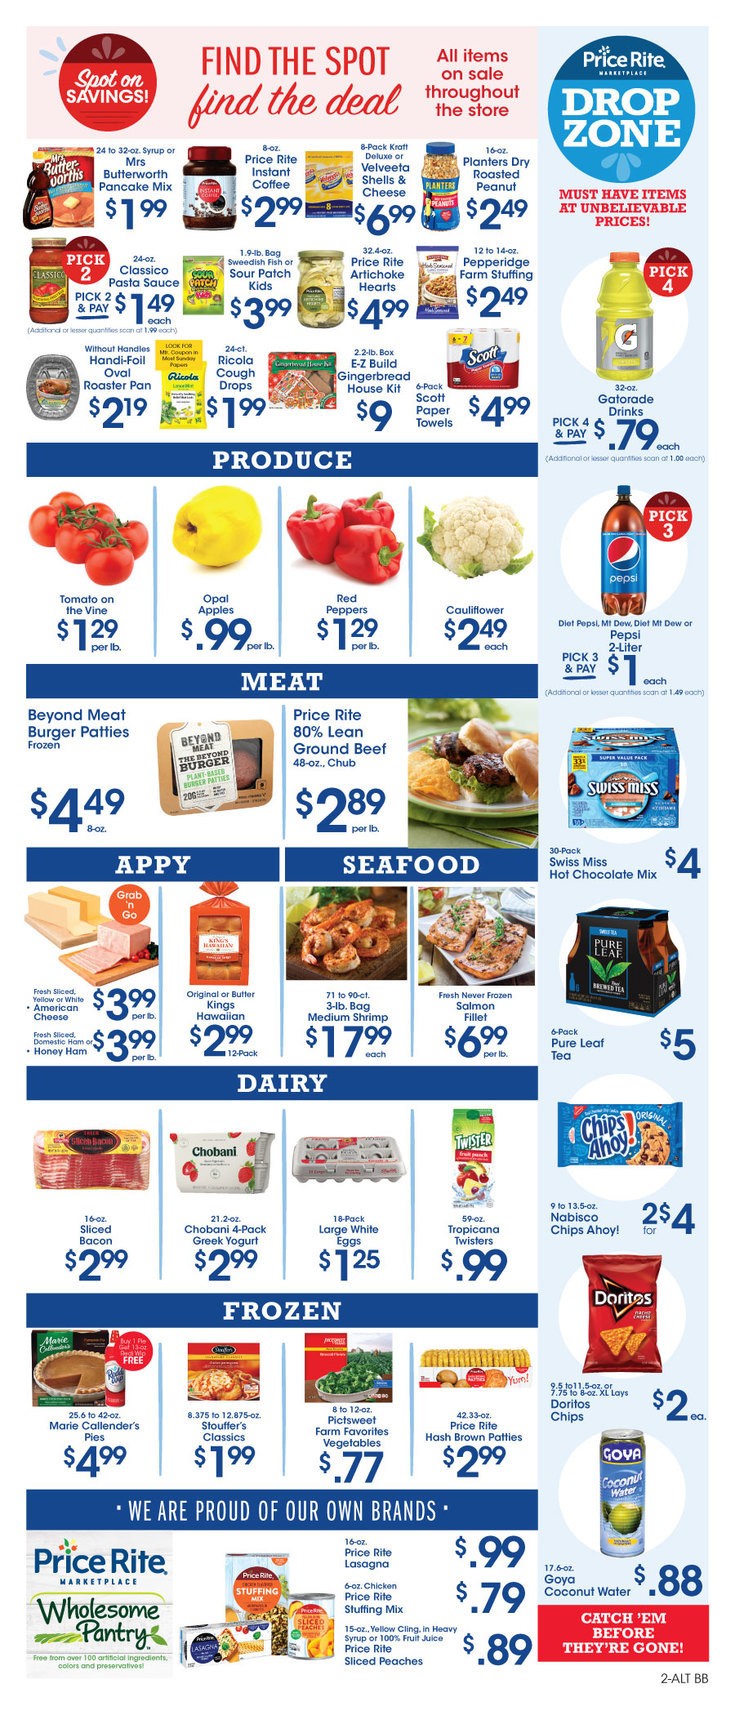 Price Rite Weekly Ad from November 8